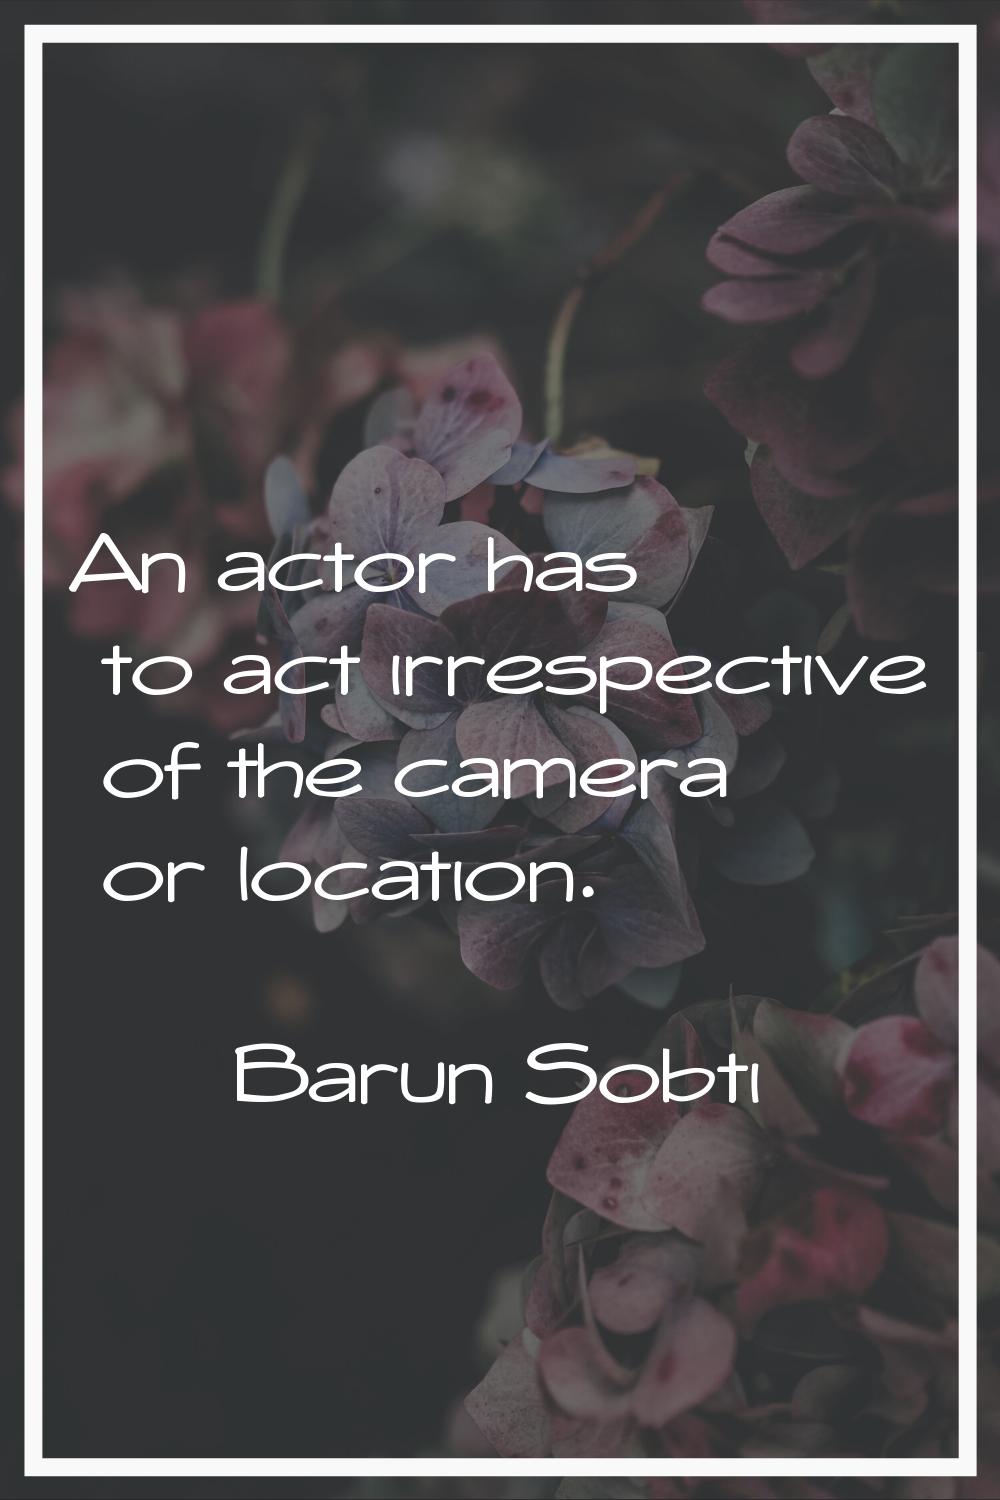 An actor has to act irrespective of the camera or location.